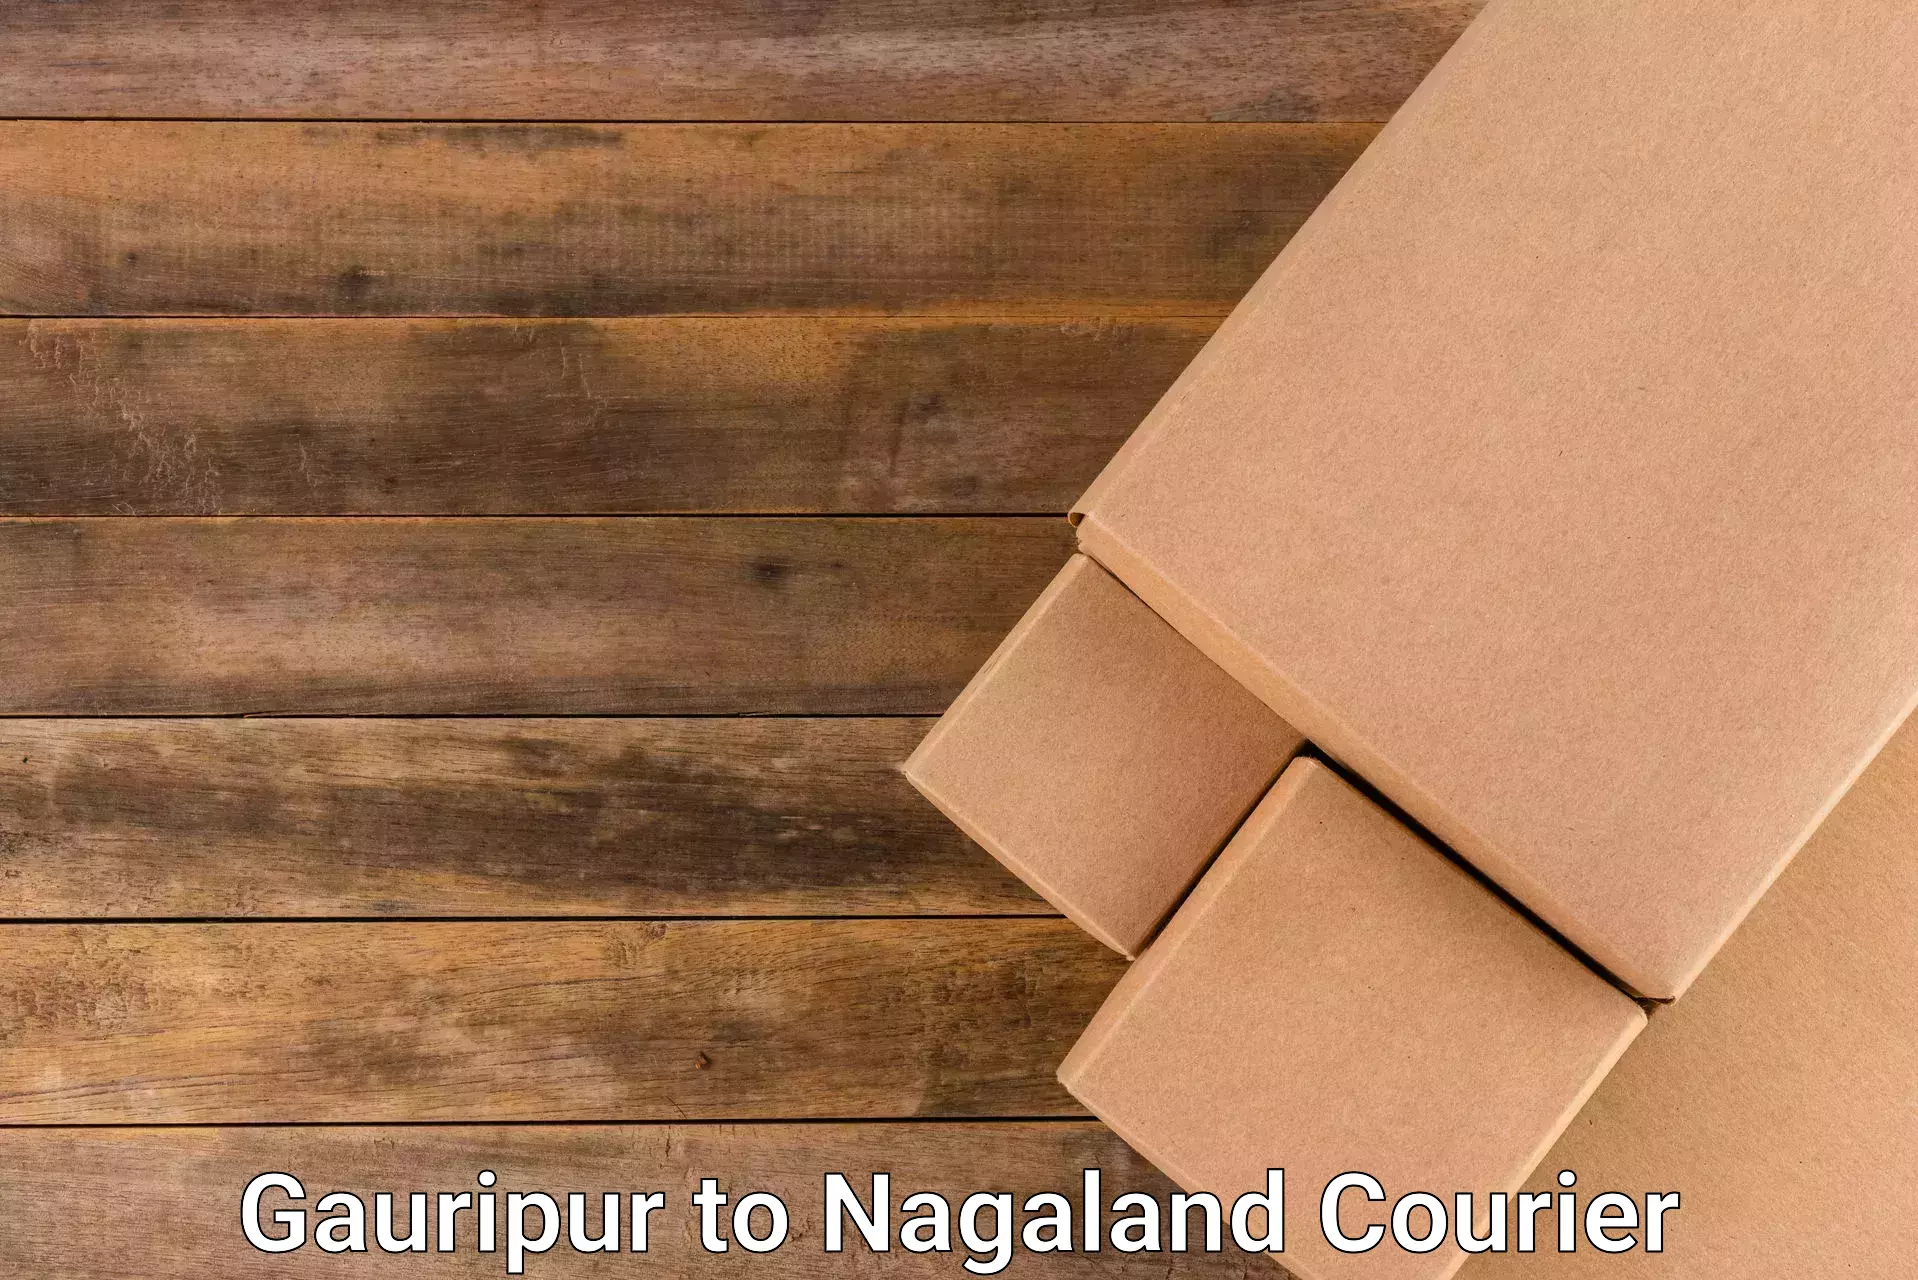 24-hour delivery options in Gauripur to Nagaland